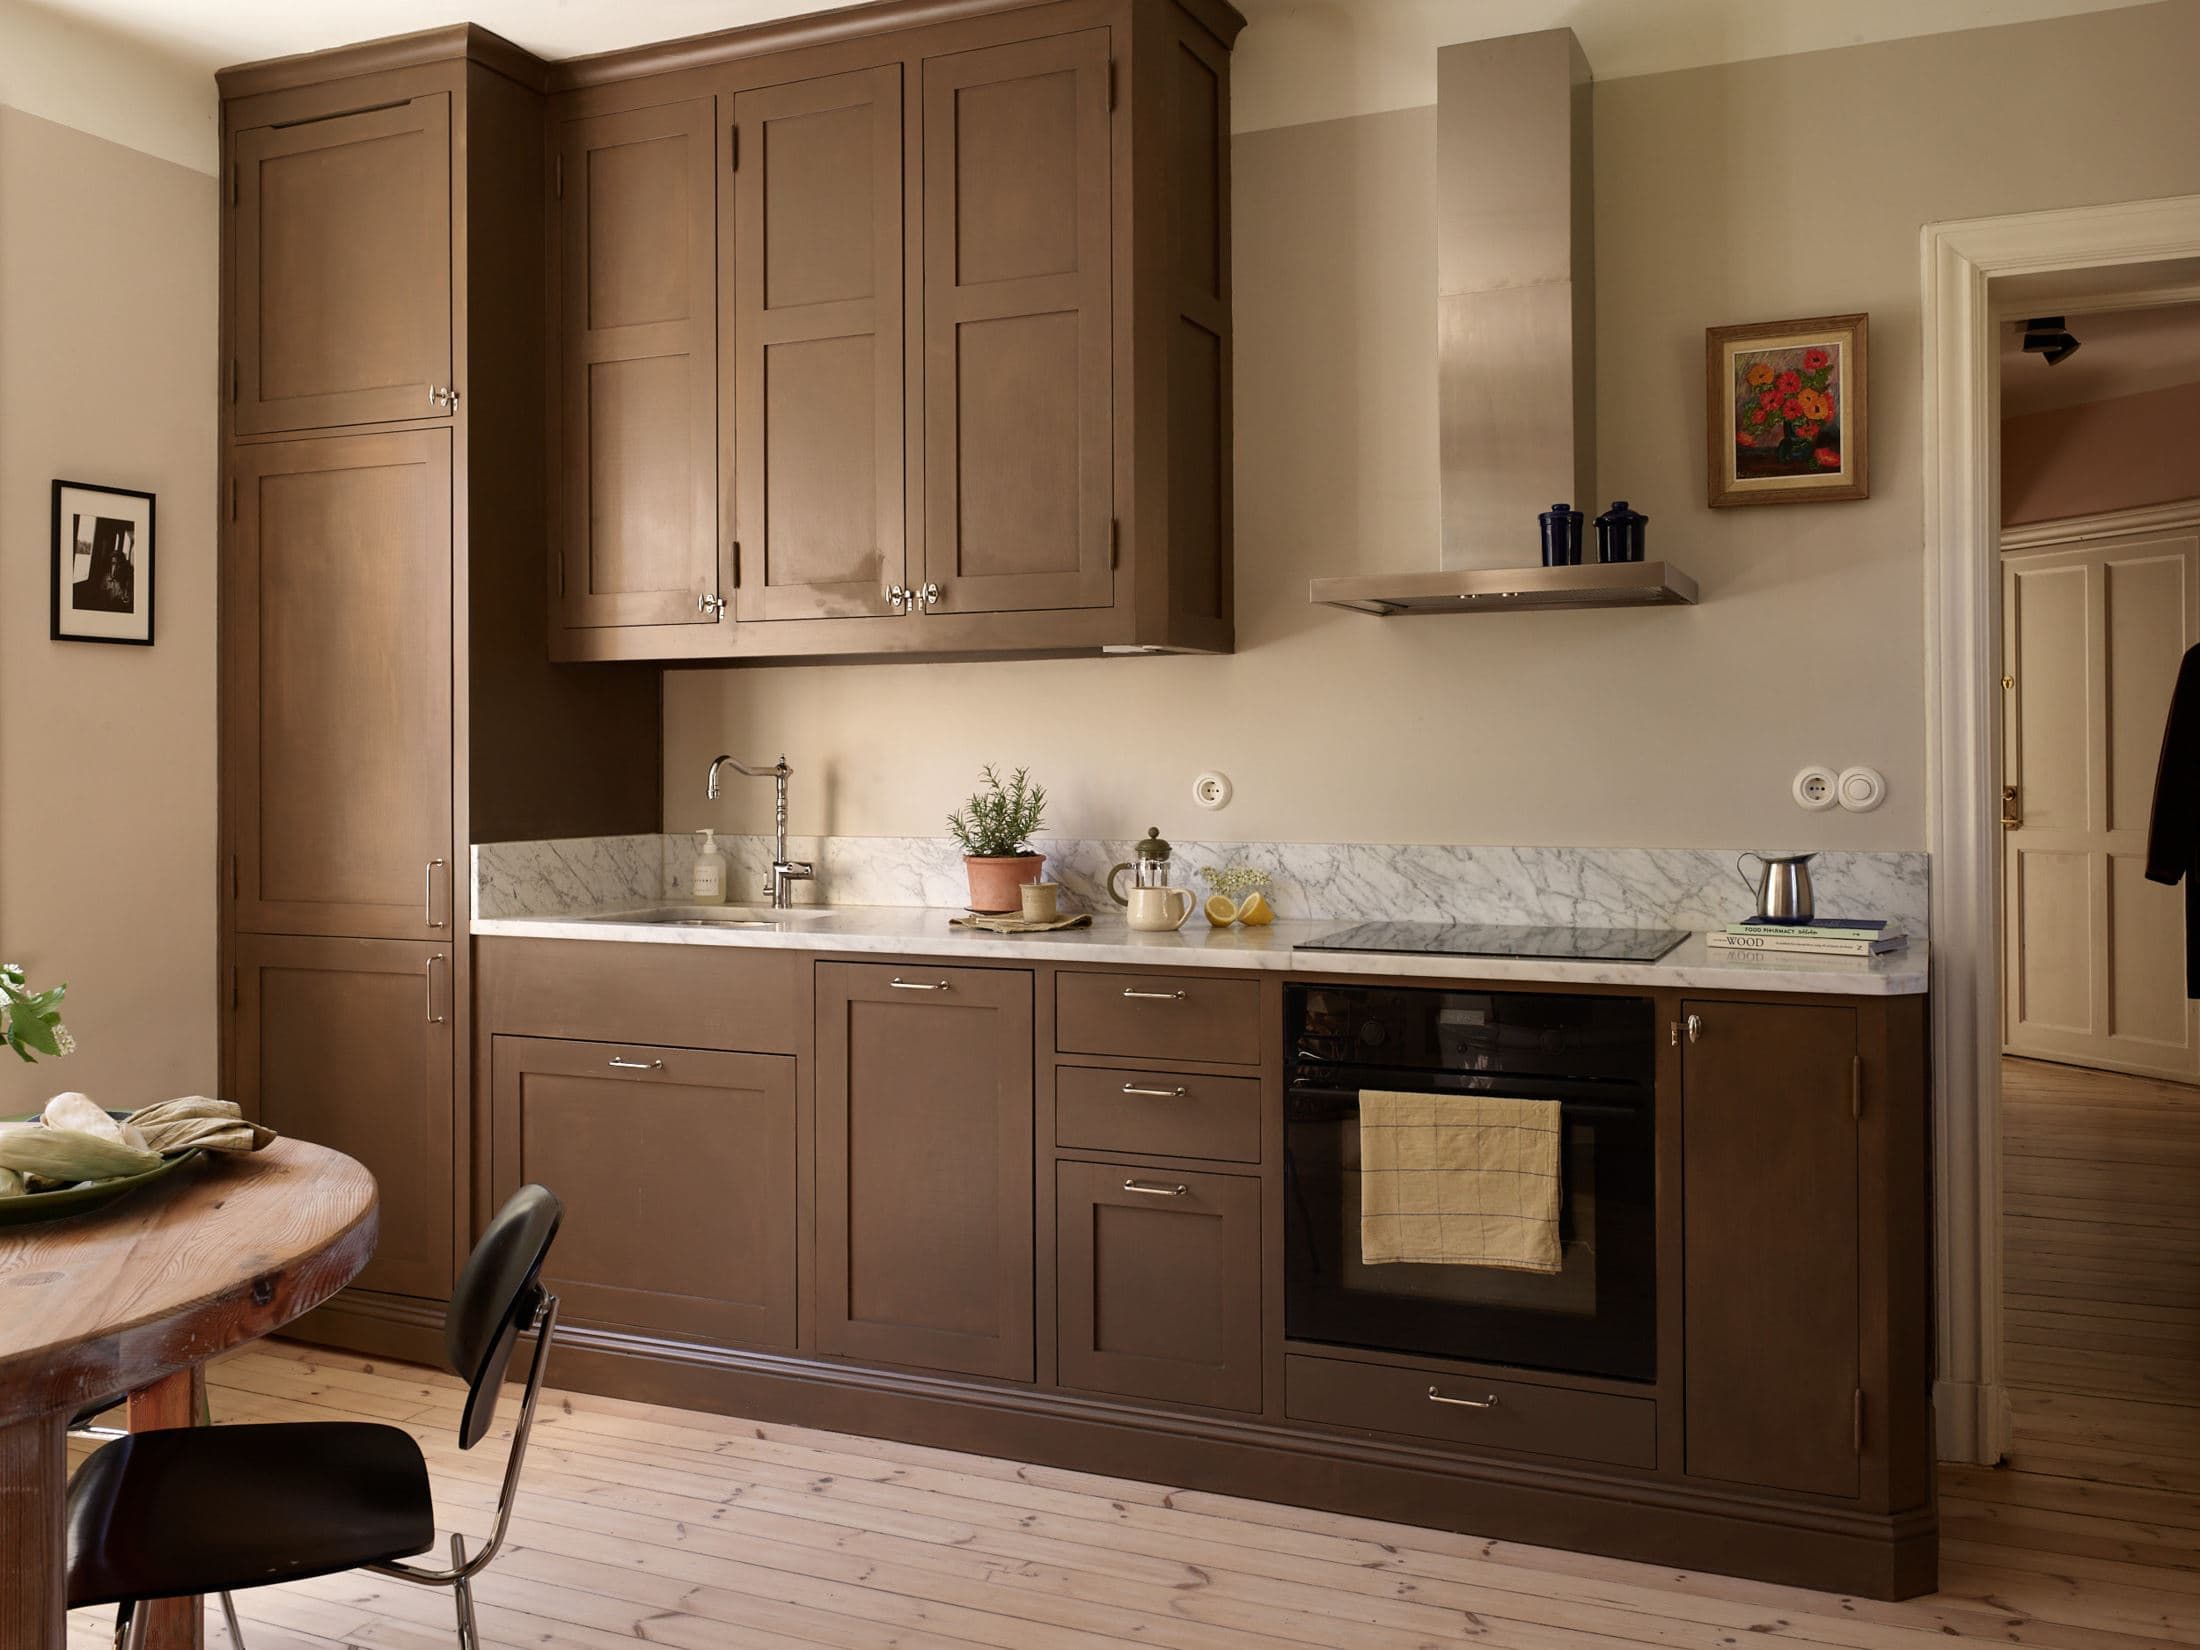 Brown Kitchen Cabinets In A Spacious Turn Of The Century Home14 